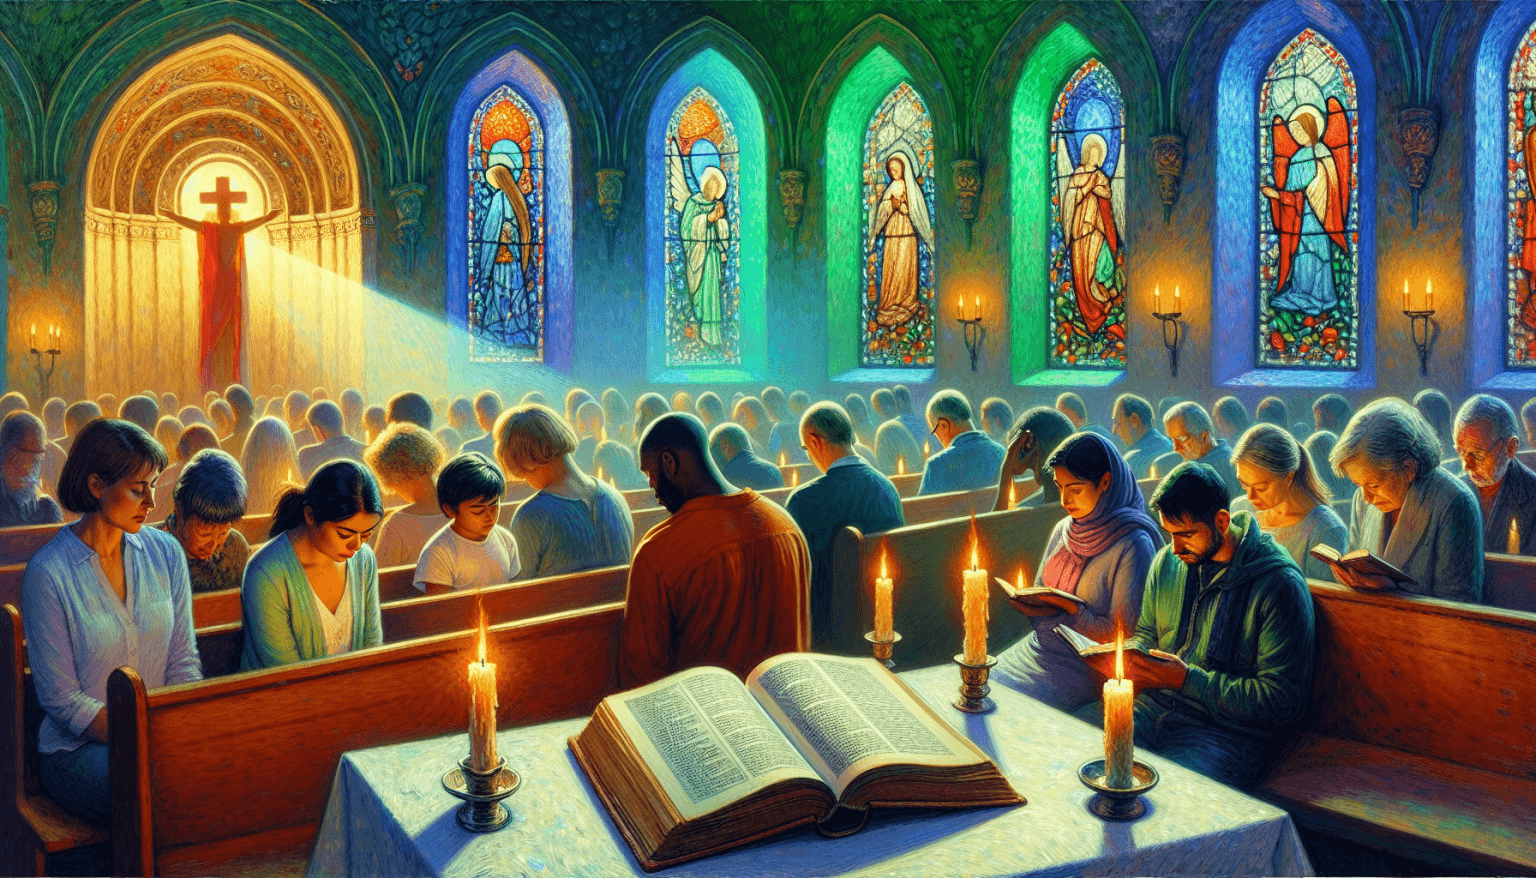 Serene chapel filled with soft light, candles flickering, an open ancient book illuminated by the candlelight, and stained glass windows depicting guardian angels, with people of diverse backgrounds s